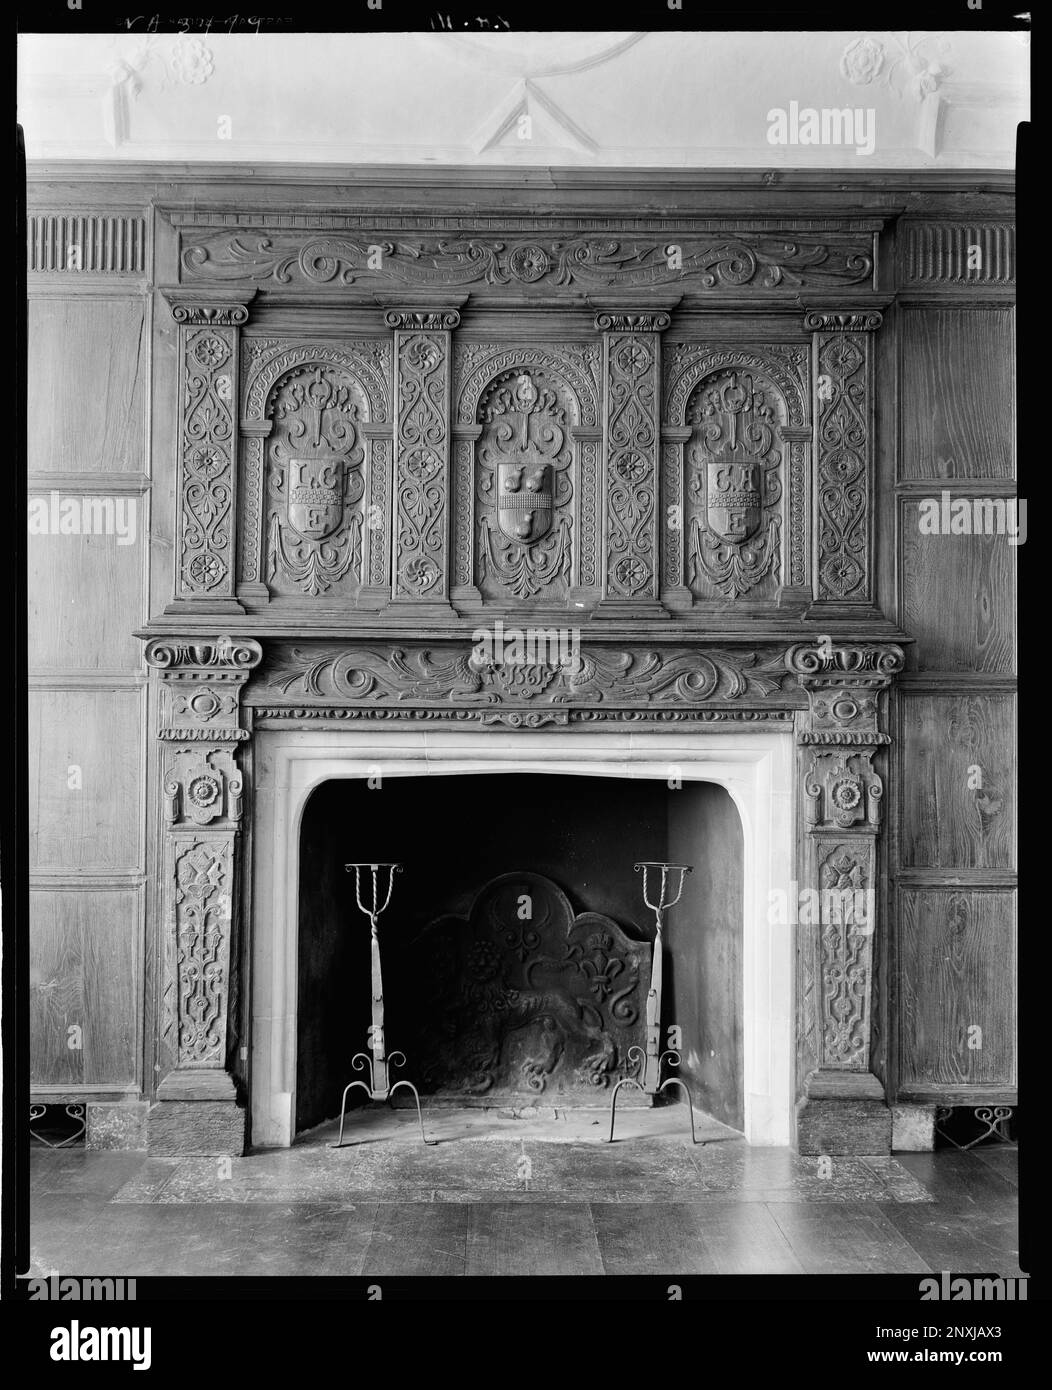 Virginia House, Withdrawing Room, Richmond, Henrico County, Virginia. Carnegie Survey of the Architecture of the South. United States  Virginia  Henrico County  Richmond, Andirons, Fireplaces, Overmantels, Woodwork. Stock Photo